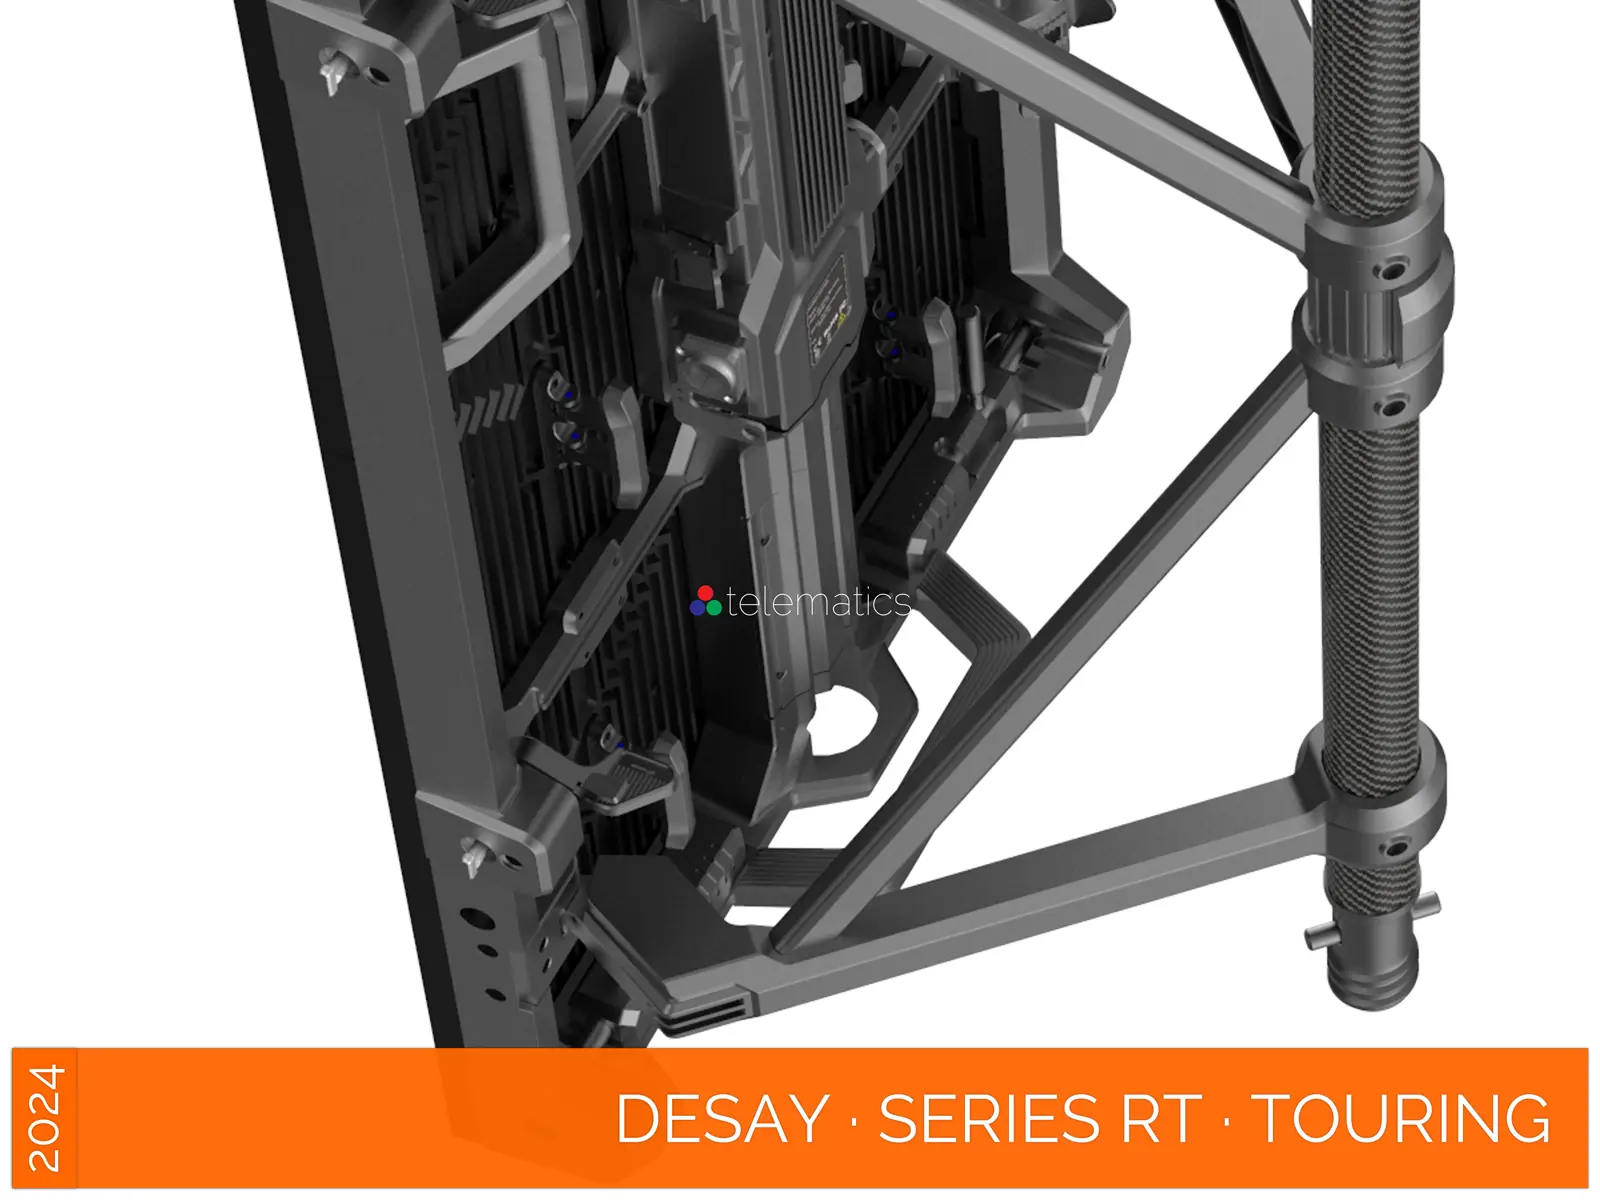 Desay · Series RT · Direct View LED Display Panel · Full Pixel Range · Rental Or Touring · Outdoor Rated · Rapid Service And Setup · Touring Rigging For Quick Setup And Tear Down · NovaStar COEX MX CX · Vision Management Platform · Viplex · review · price · cost · priced from $1,790 per square meter